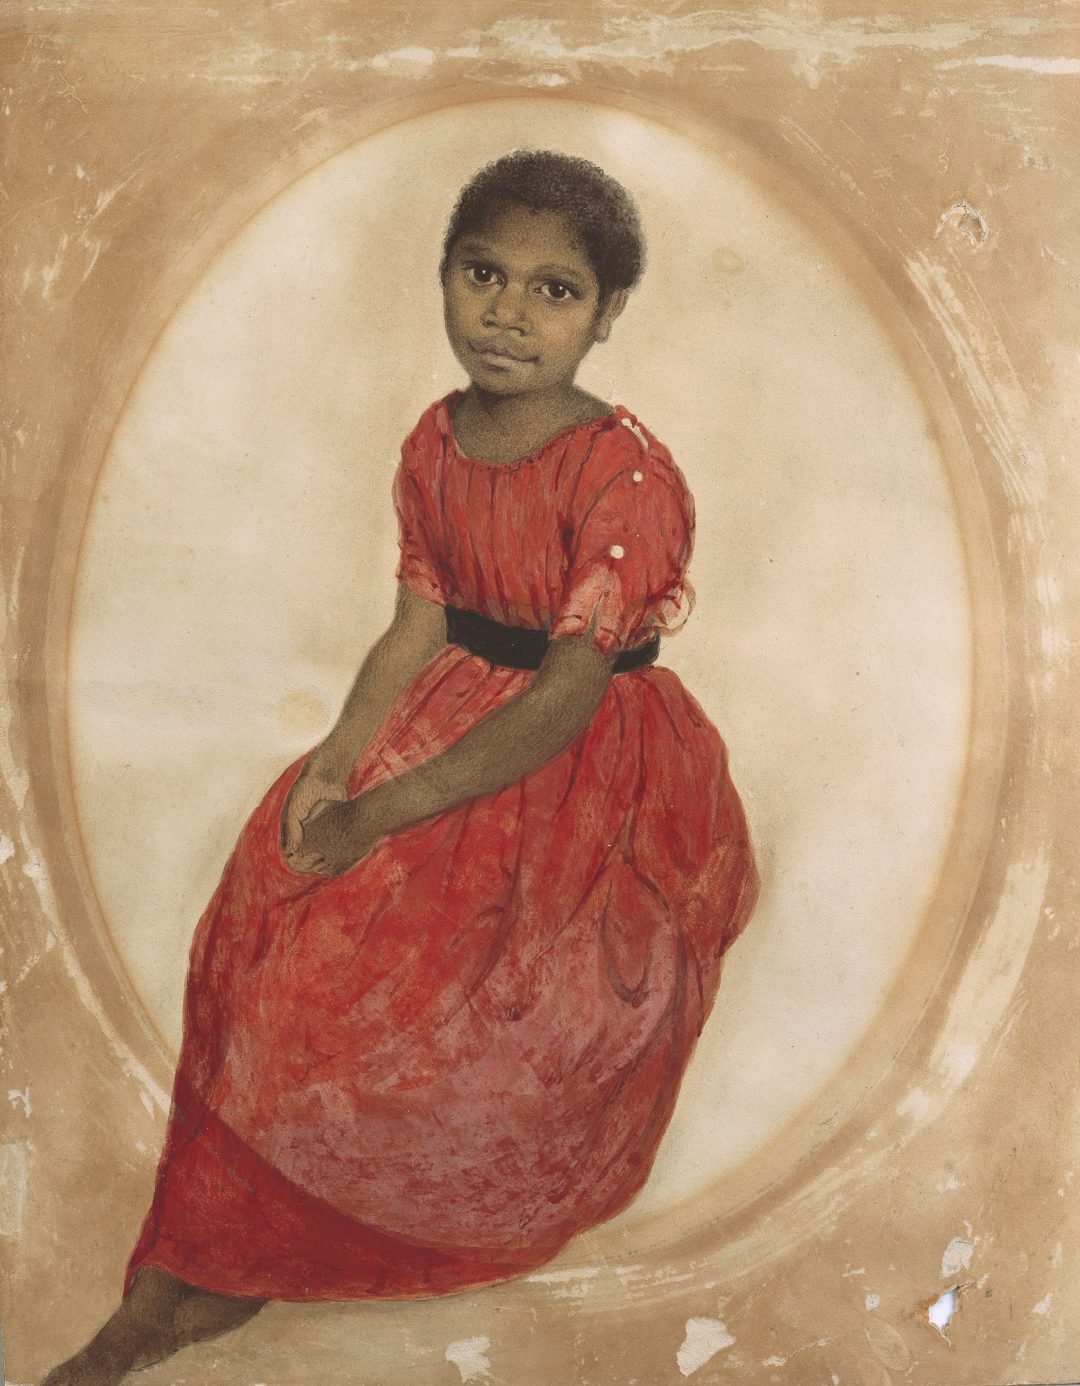 Thomas Bock, Mathinna, 1842, Watercolour. Collection Tasmanian Museum and Art Gallery, presented by J H Clark, 1951 AG290